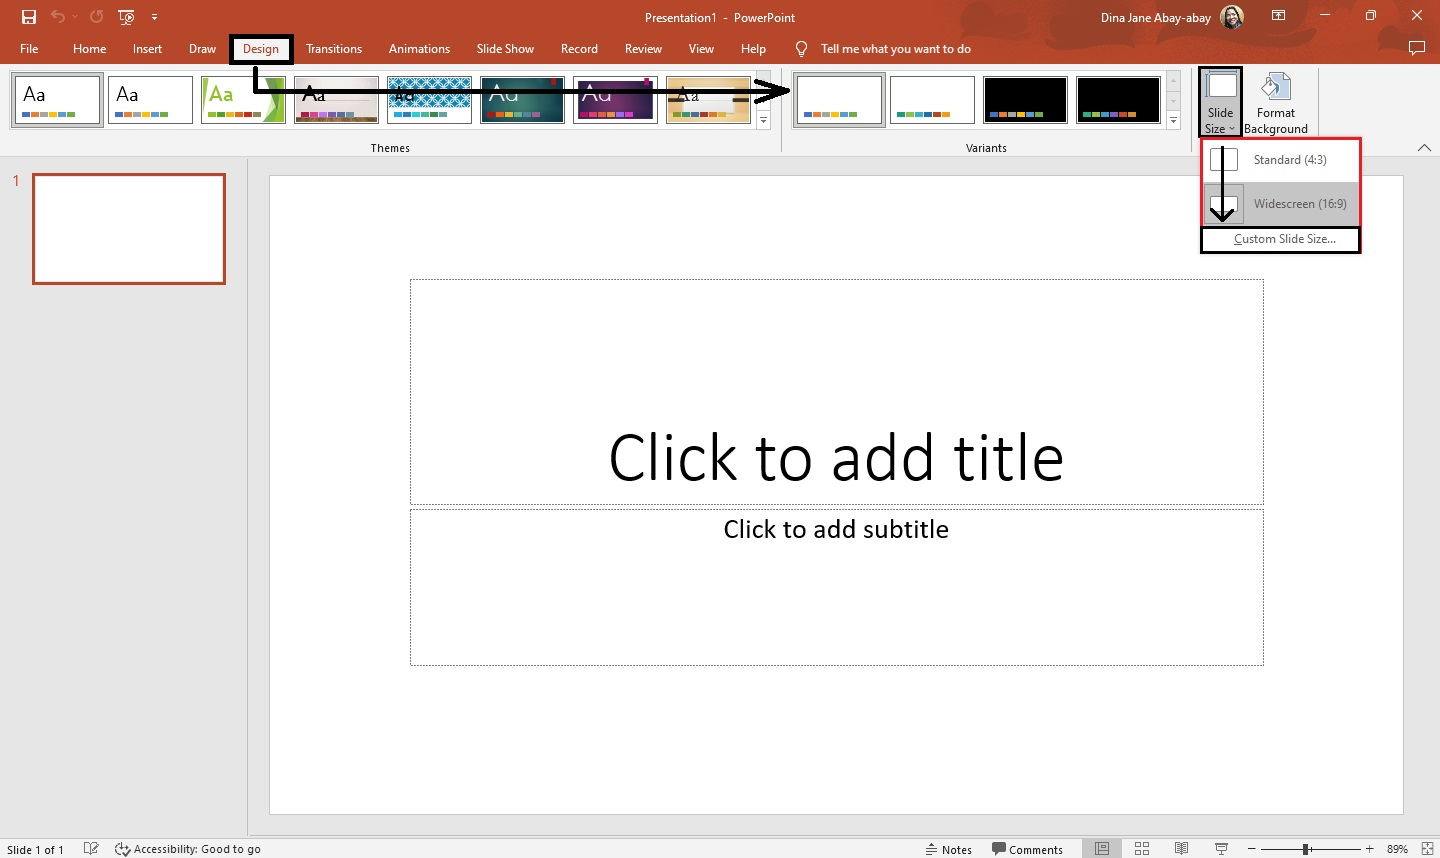 Click "Design" tab and select "Slide size." Then click "Custom Slide size."